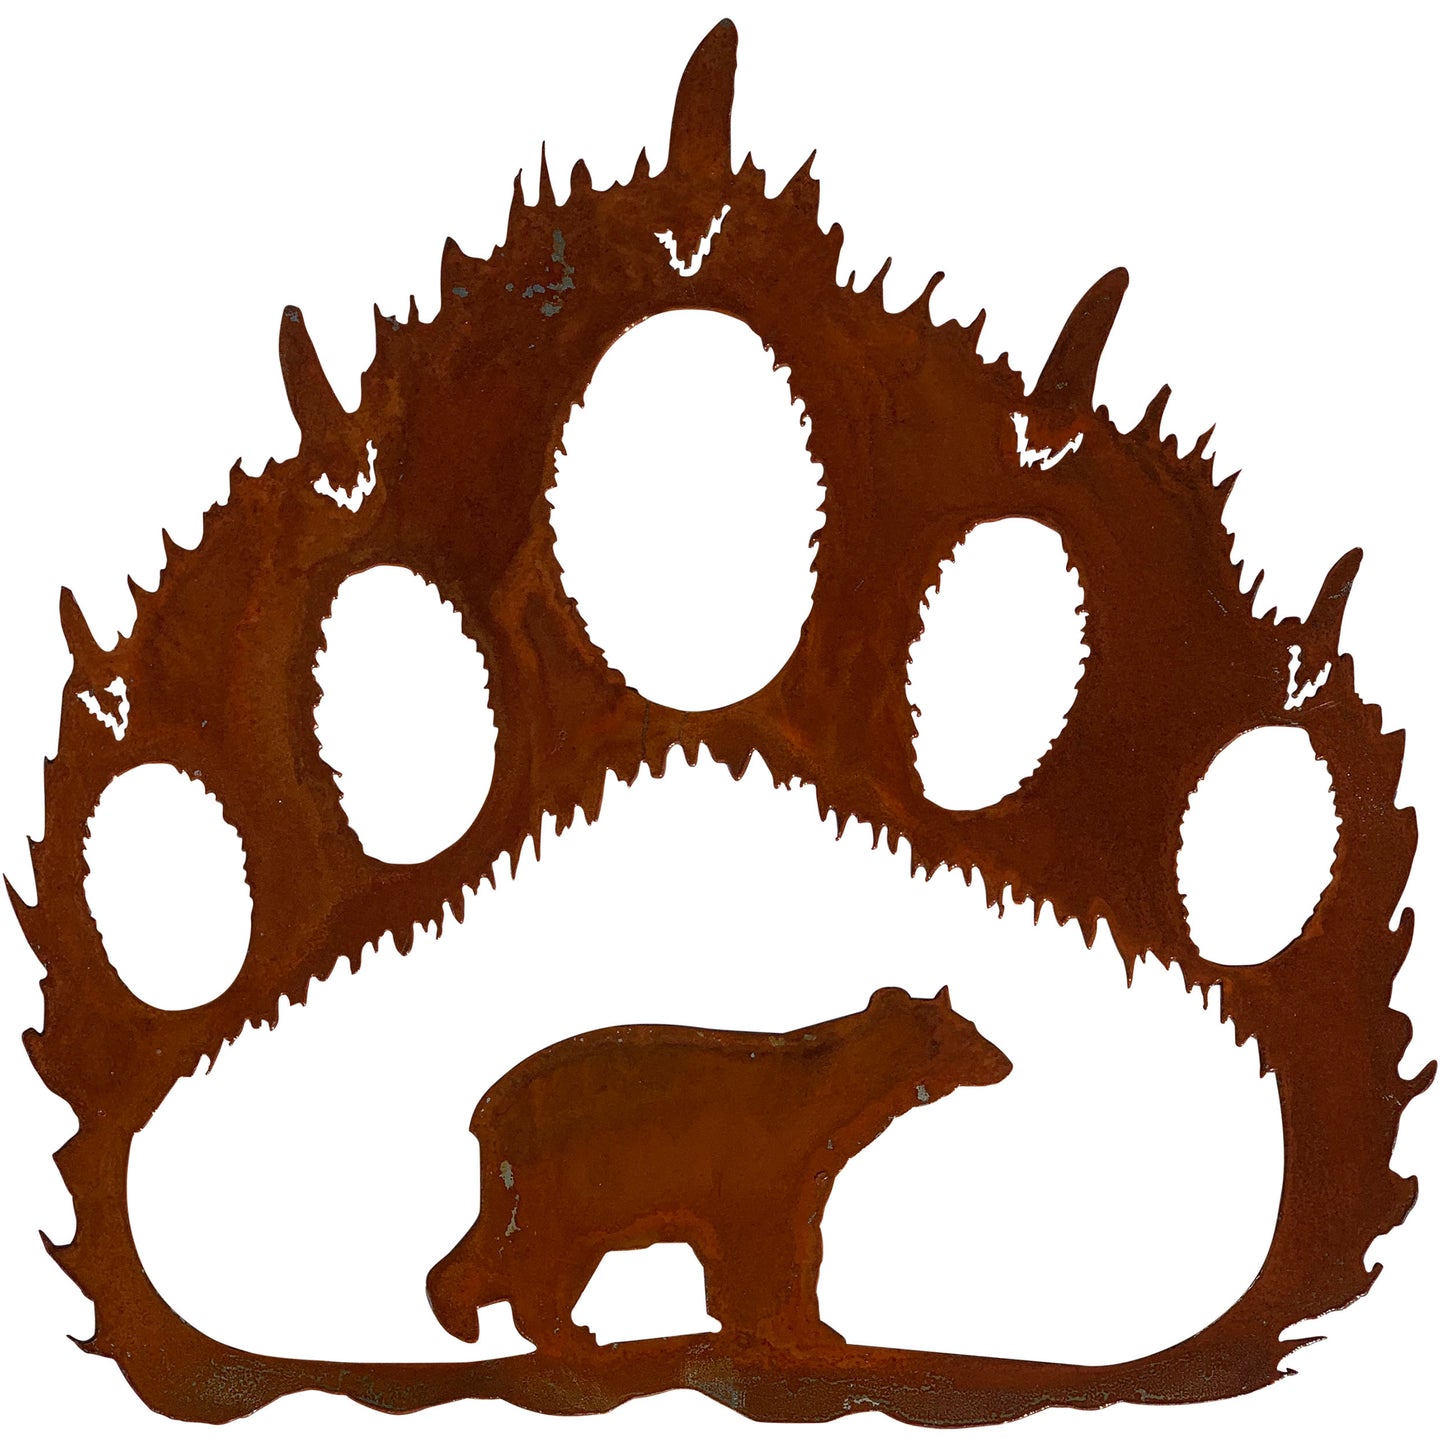 Large Bear Paw with Bear Scene Lodge and Rustic Metal Decor